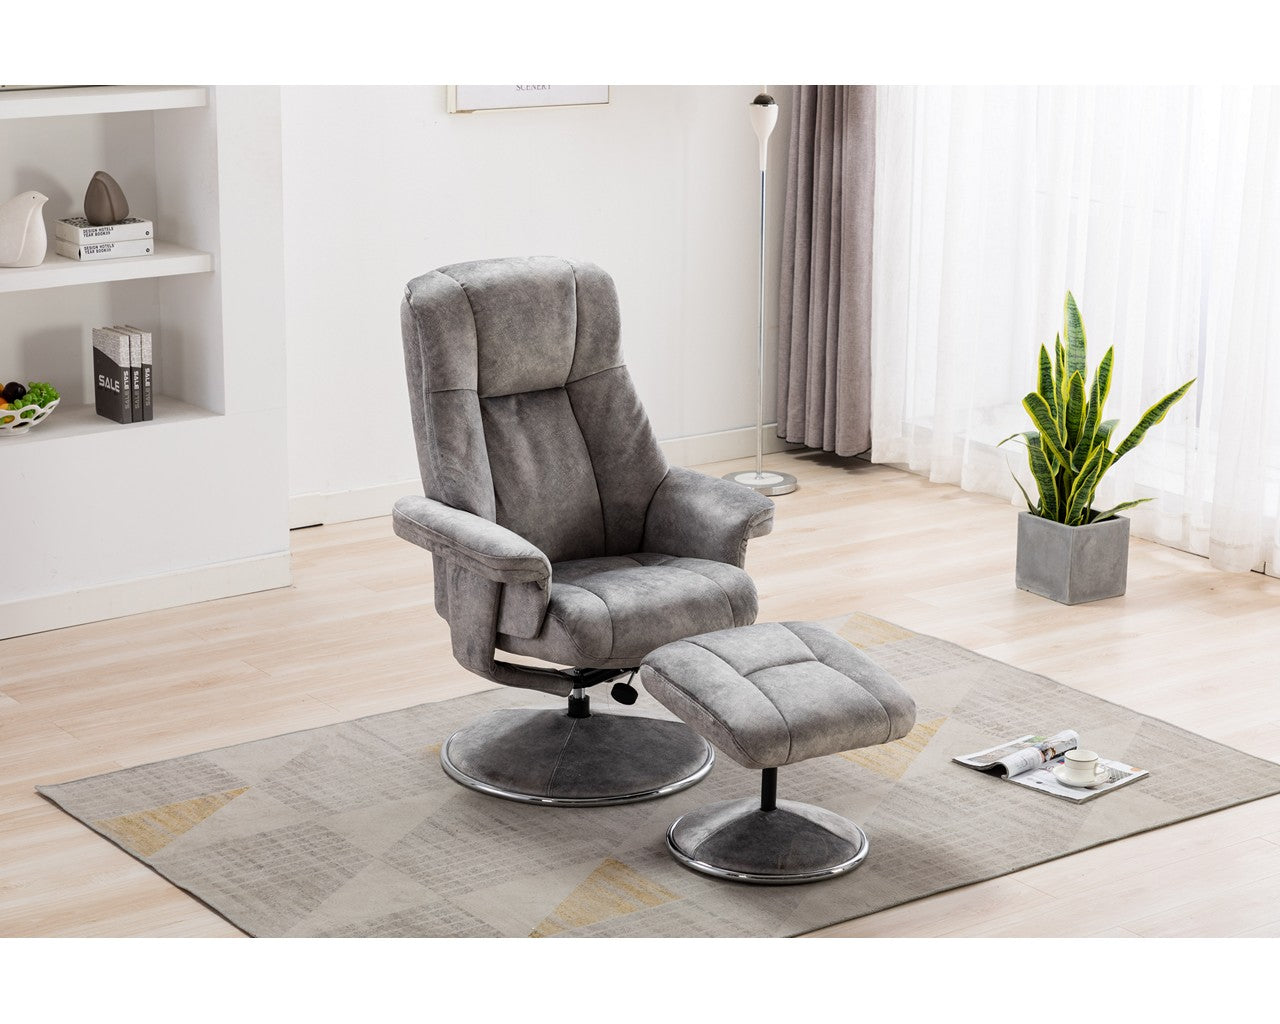 Swivel Recliner Chair Collection - Denver: Elephant